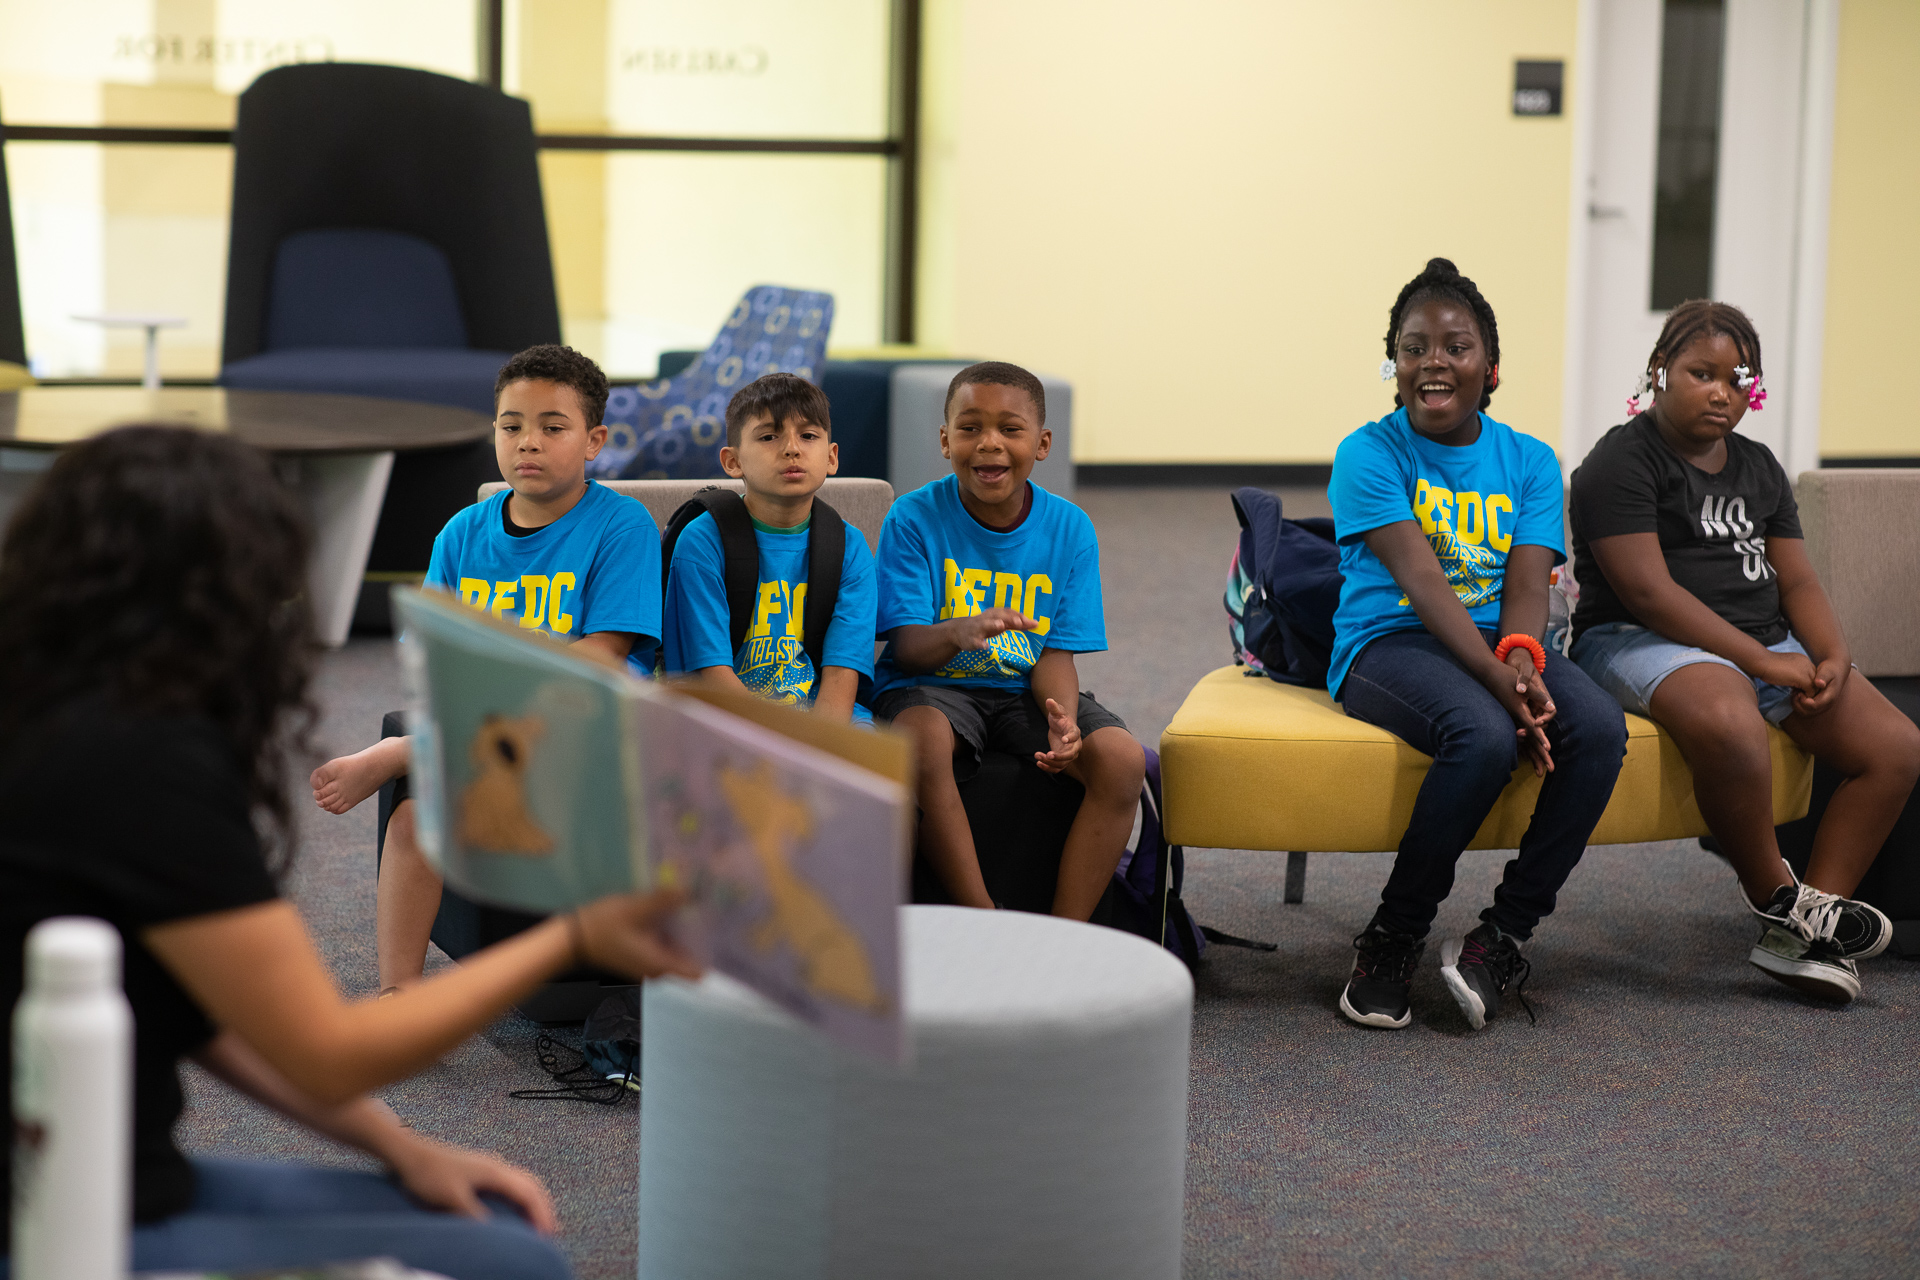 Roberts Family Development Center students wearing blue shirts listen attentively as a story is read from a book during a recent field trip to Sacramento State.